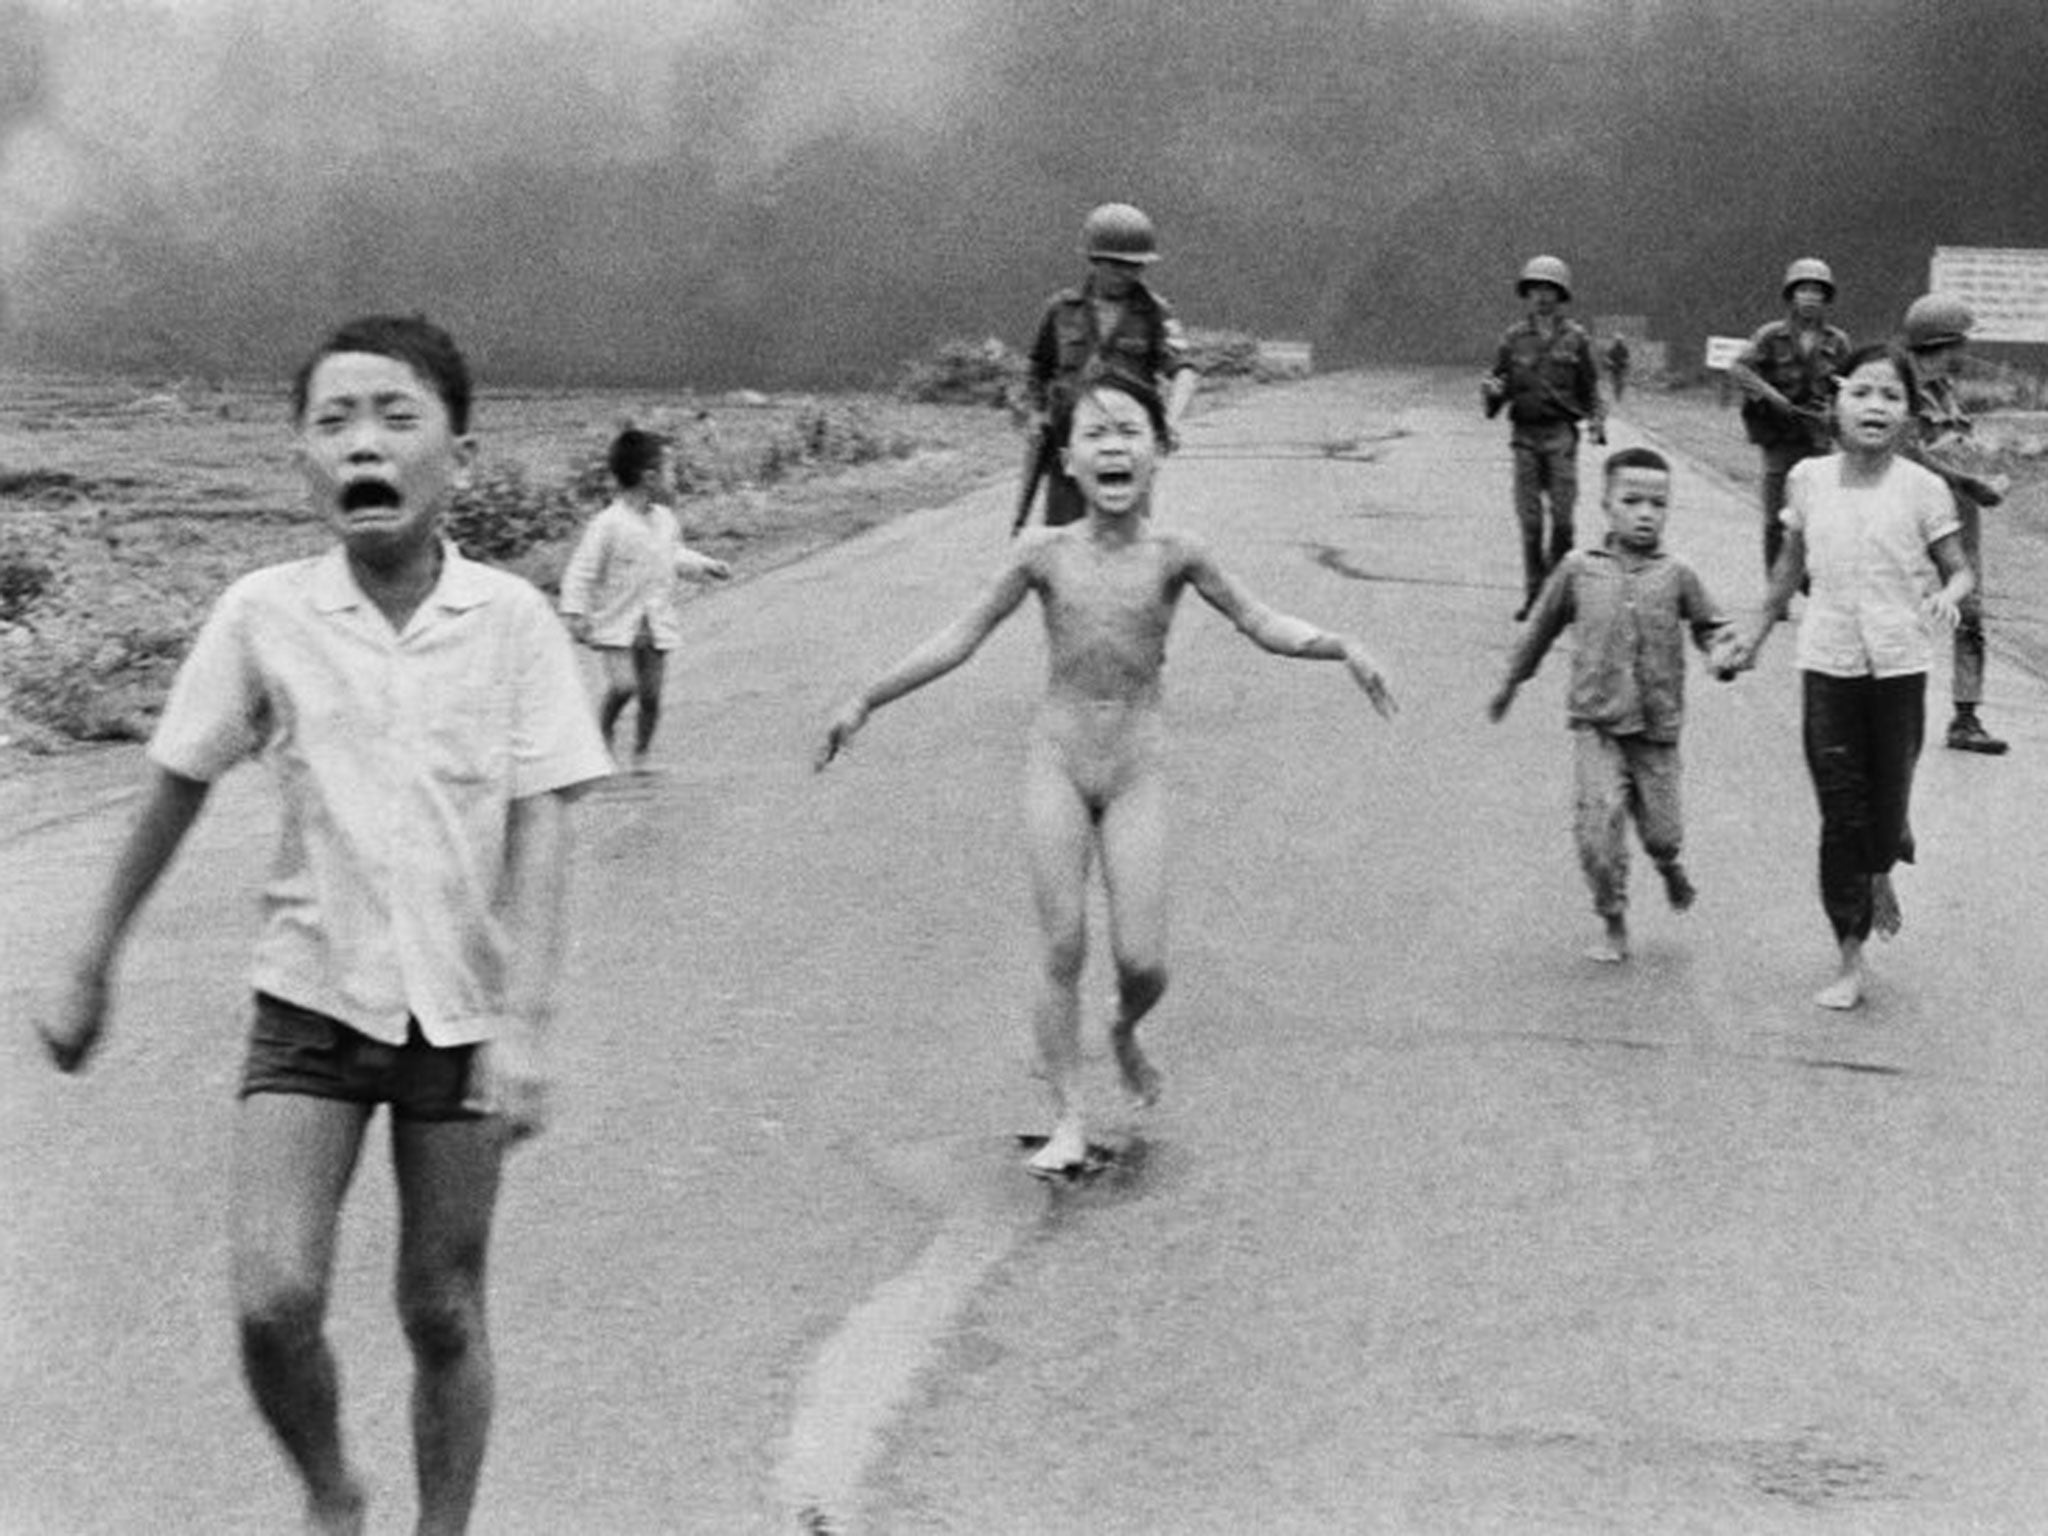 FILE - In this June 8, 1972, file photo, 9-year-old Kim Phuc, center, runs with her brothers and cousins, followed by South Vietnamese forces, down Route 1 near Trang Bang after a South Vietnamese plane accidentally dropped its flaming napalm on its own troops and civilians. The terrified girl had ripped off her burning clothes while fleeing. In late September 2015, Phuc, 52, began a series of laser treatments at the Miami Dermatology and Laser Institute to smooth and soften the pale, thick scar tissue that she has endured for more than 40 years.